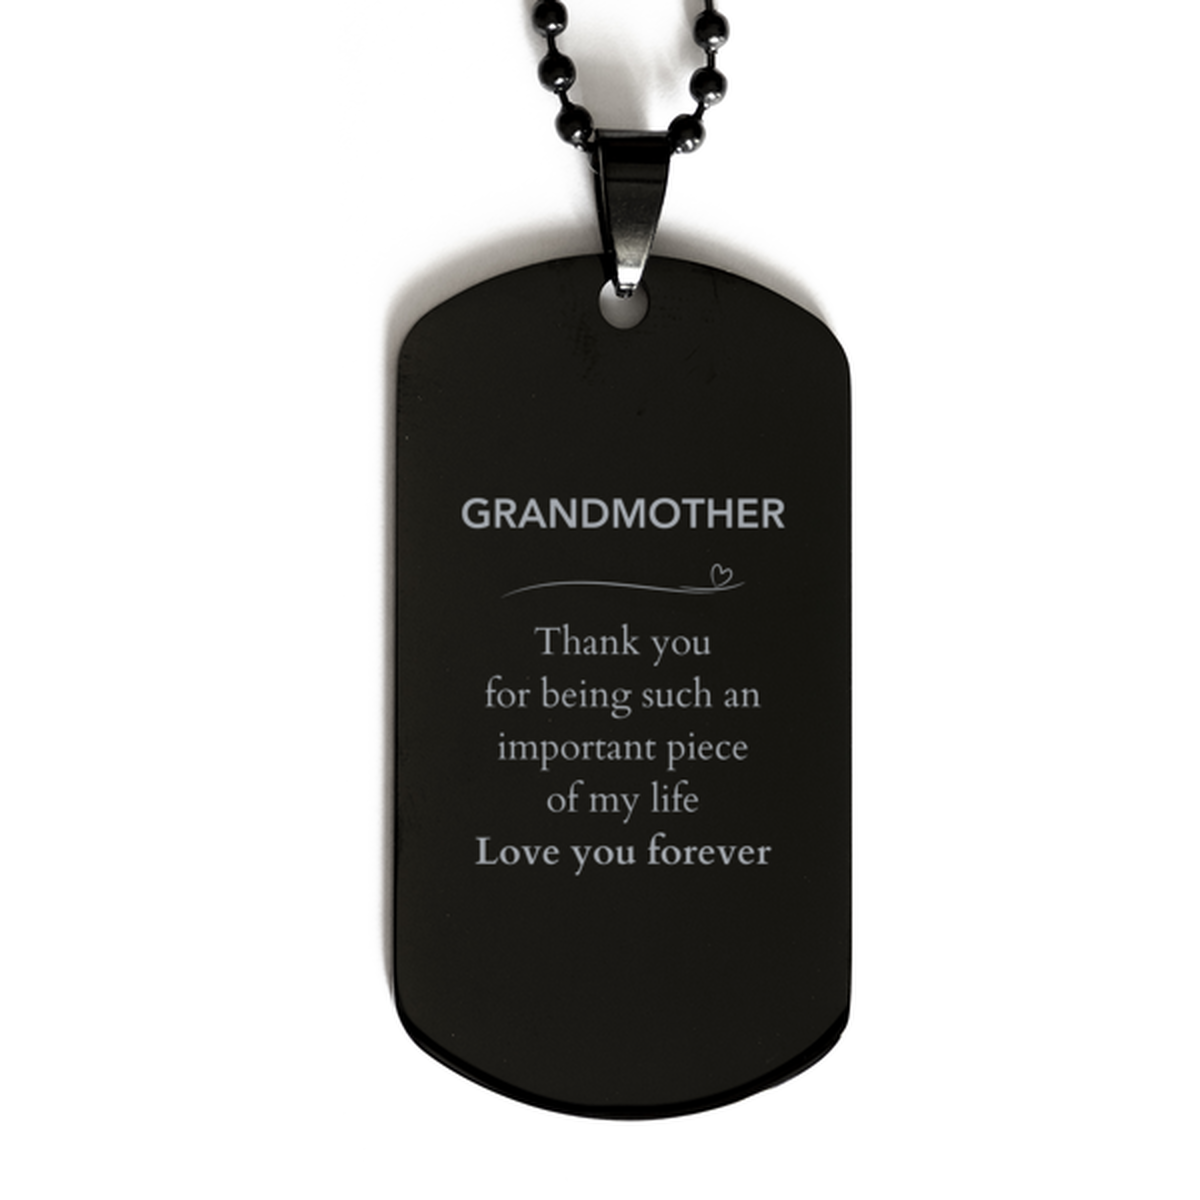 Appropriate Grandmother Black Dog Tag Epic Birthday Gifts for Grandmother Thank you for being such an important piece of my life Grandmother Christmas Mothers Fathers Day